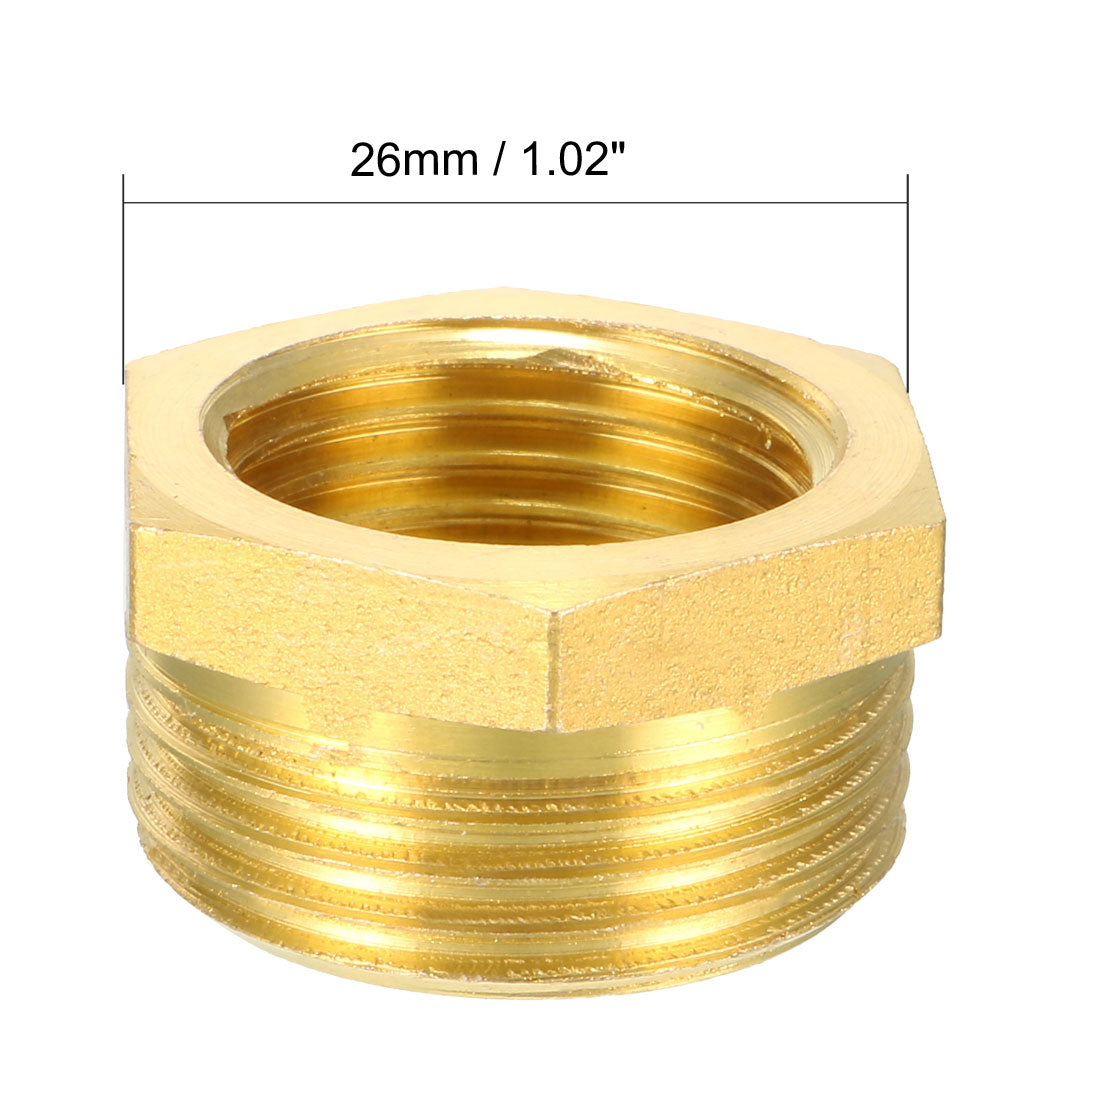 uxcell Uxcell Brass Threaded Pipe Fitting G3/4 Male x G1/2 Female Hex Bushing Adapter